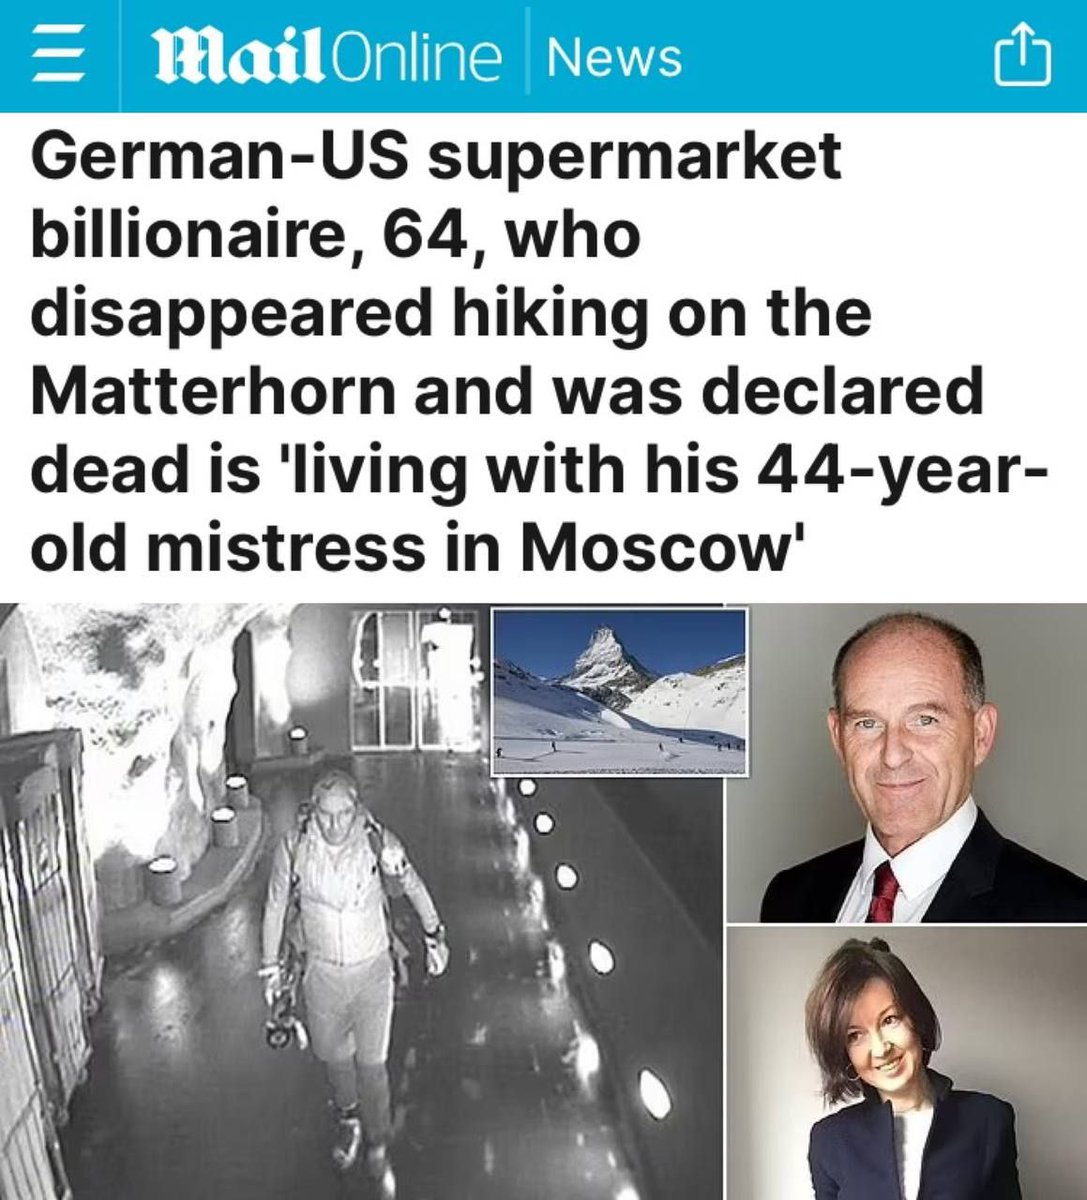 German businessman & owner of Aldi supermarket - who was declared dead in the Swiss Alps 6 years ago - lives in Moscow with his mistress. I bet he’s co not happy to gave been found!